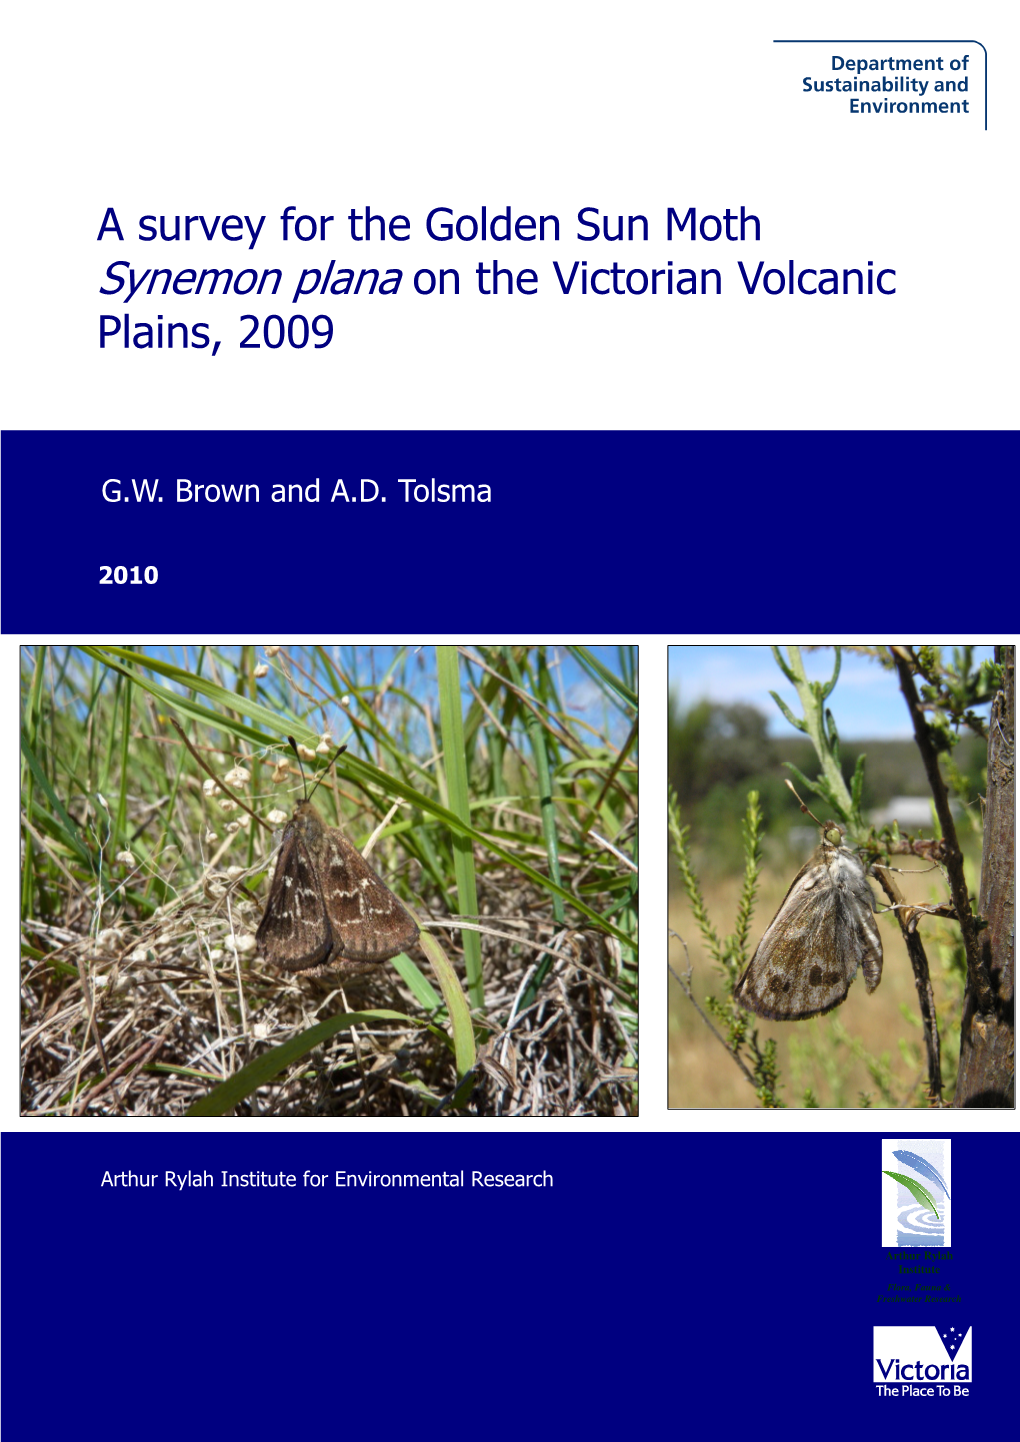 A Survey for the Golden Sun Moth Synemon Plana on the Victorian Volcanic Plains, 2009